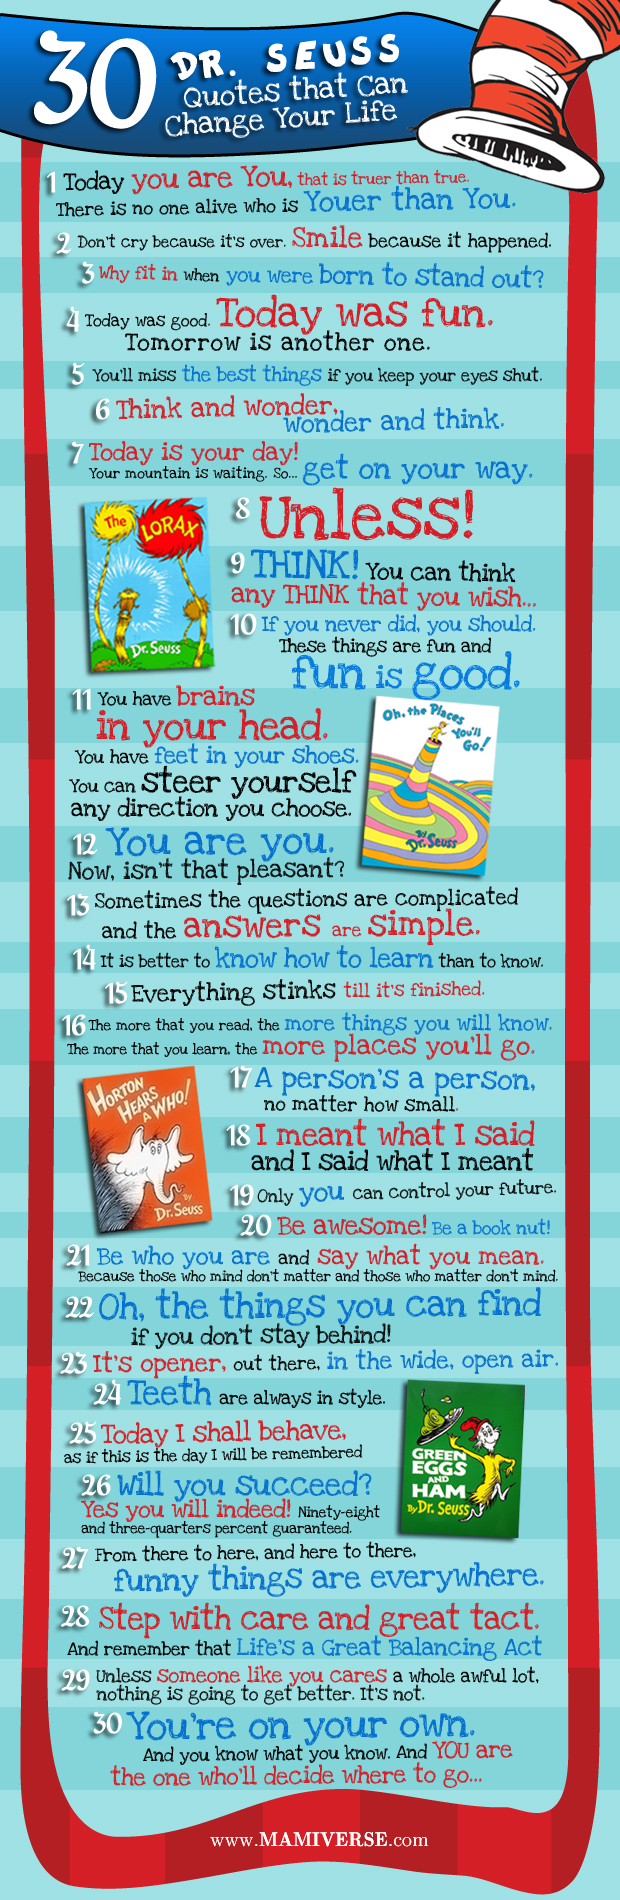 30 dr seuss quotes that can change your life infographic